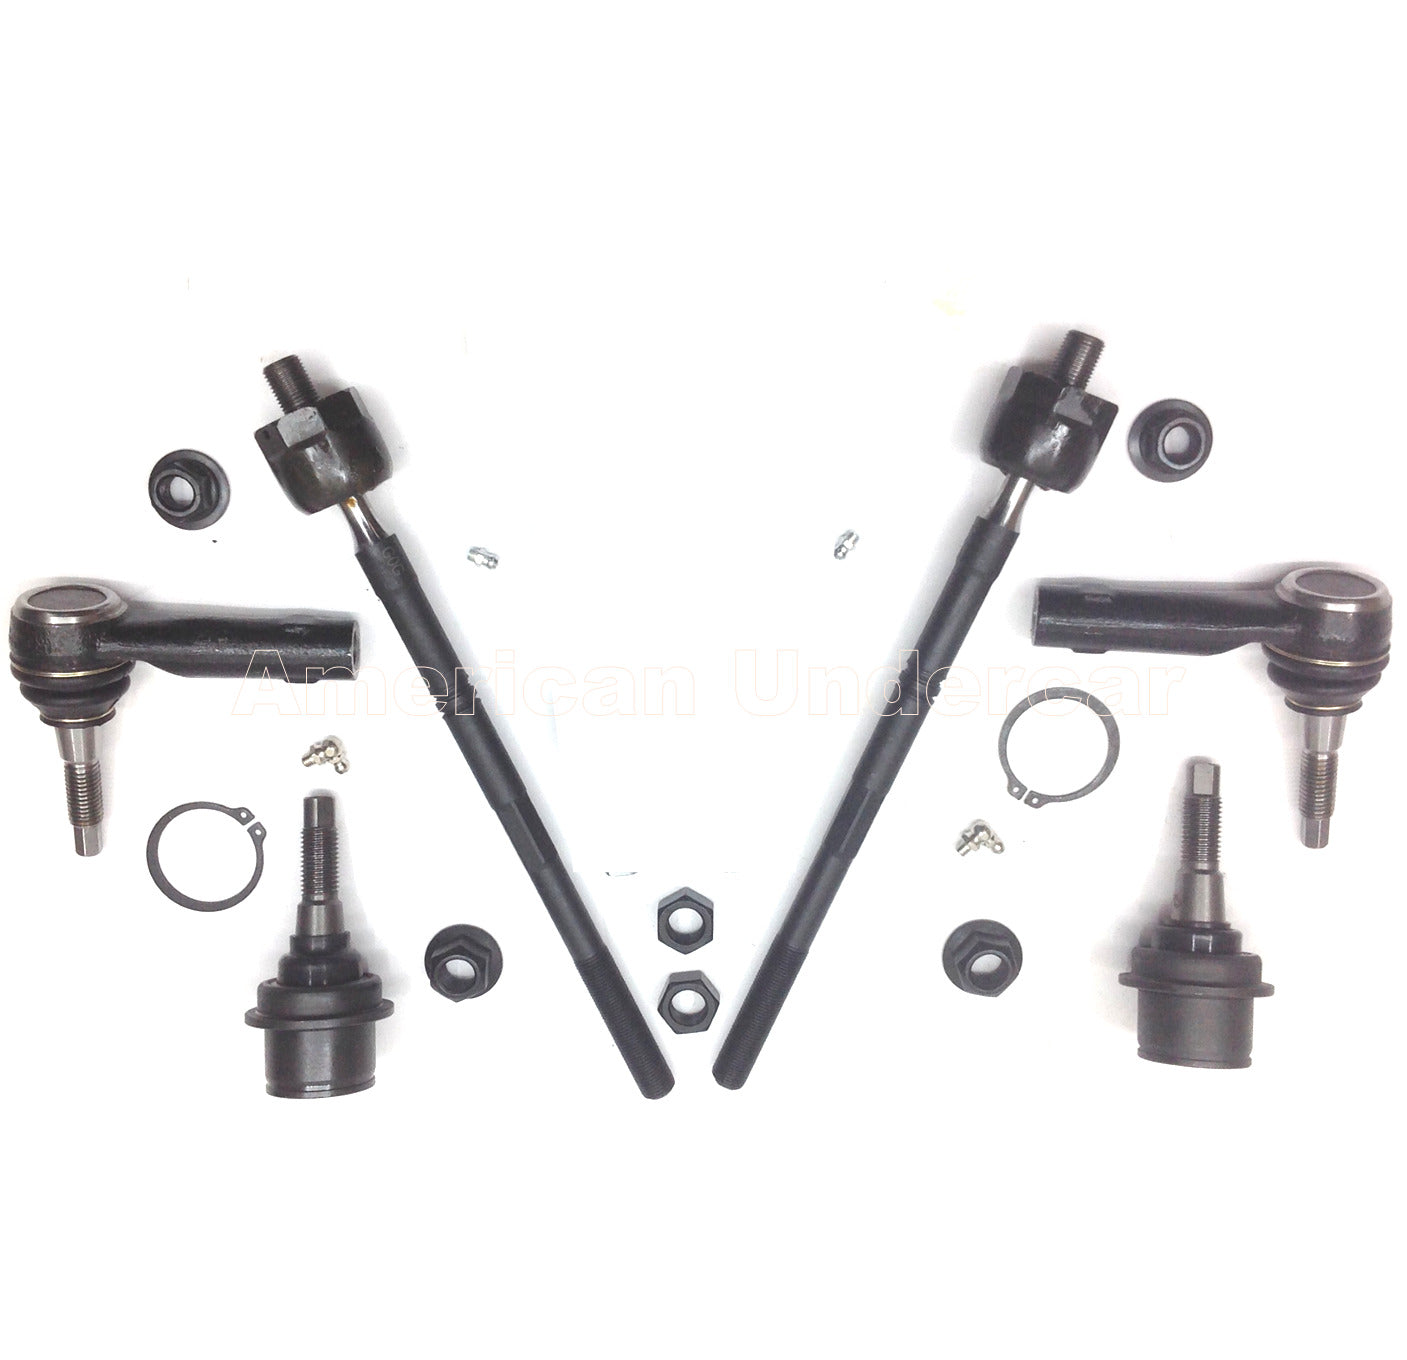 XRF Lower Ball Joints Tie Rod Ends Steering Kit for 2003-2006 Ford Expedition 4x4